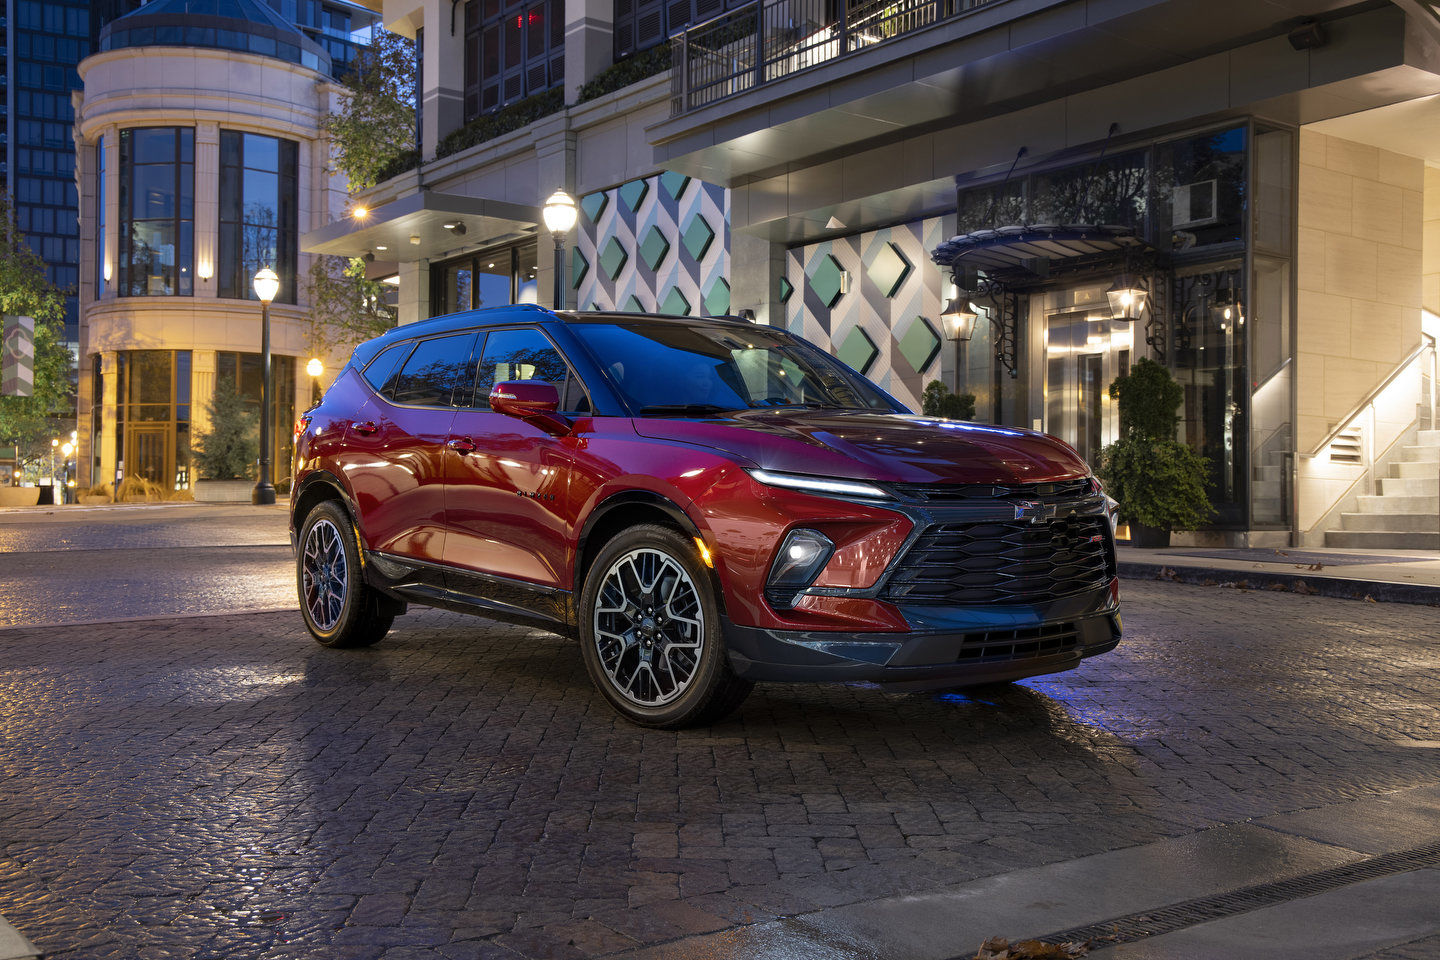 Three things to know about the 2023 Chevrolet Blazer